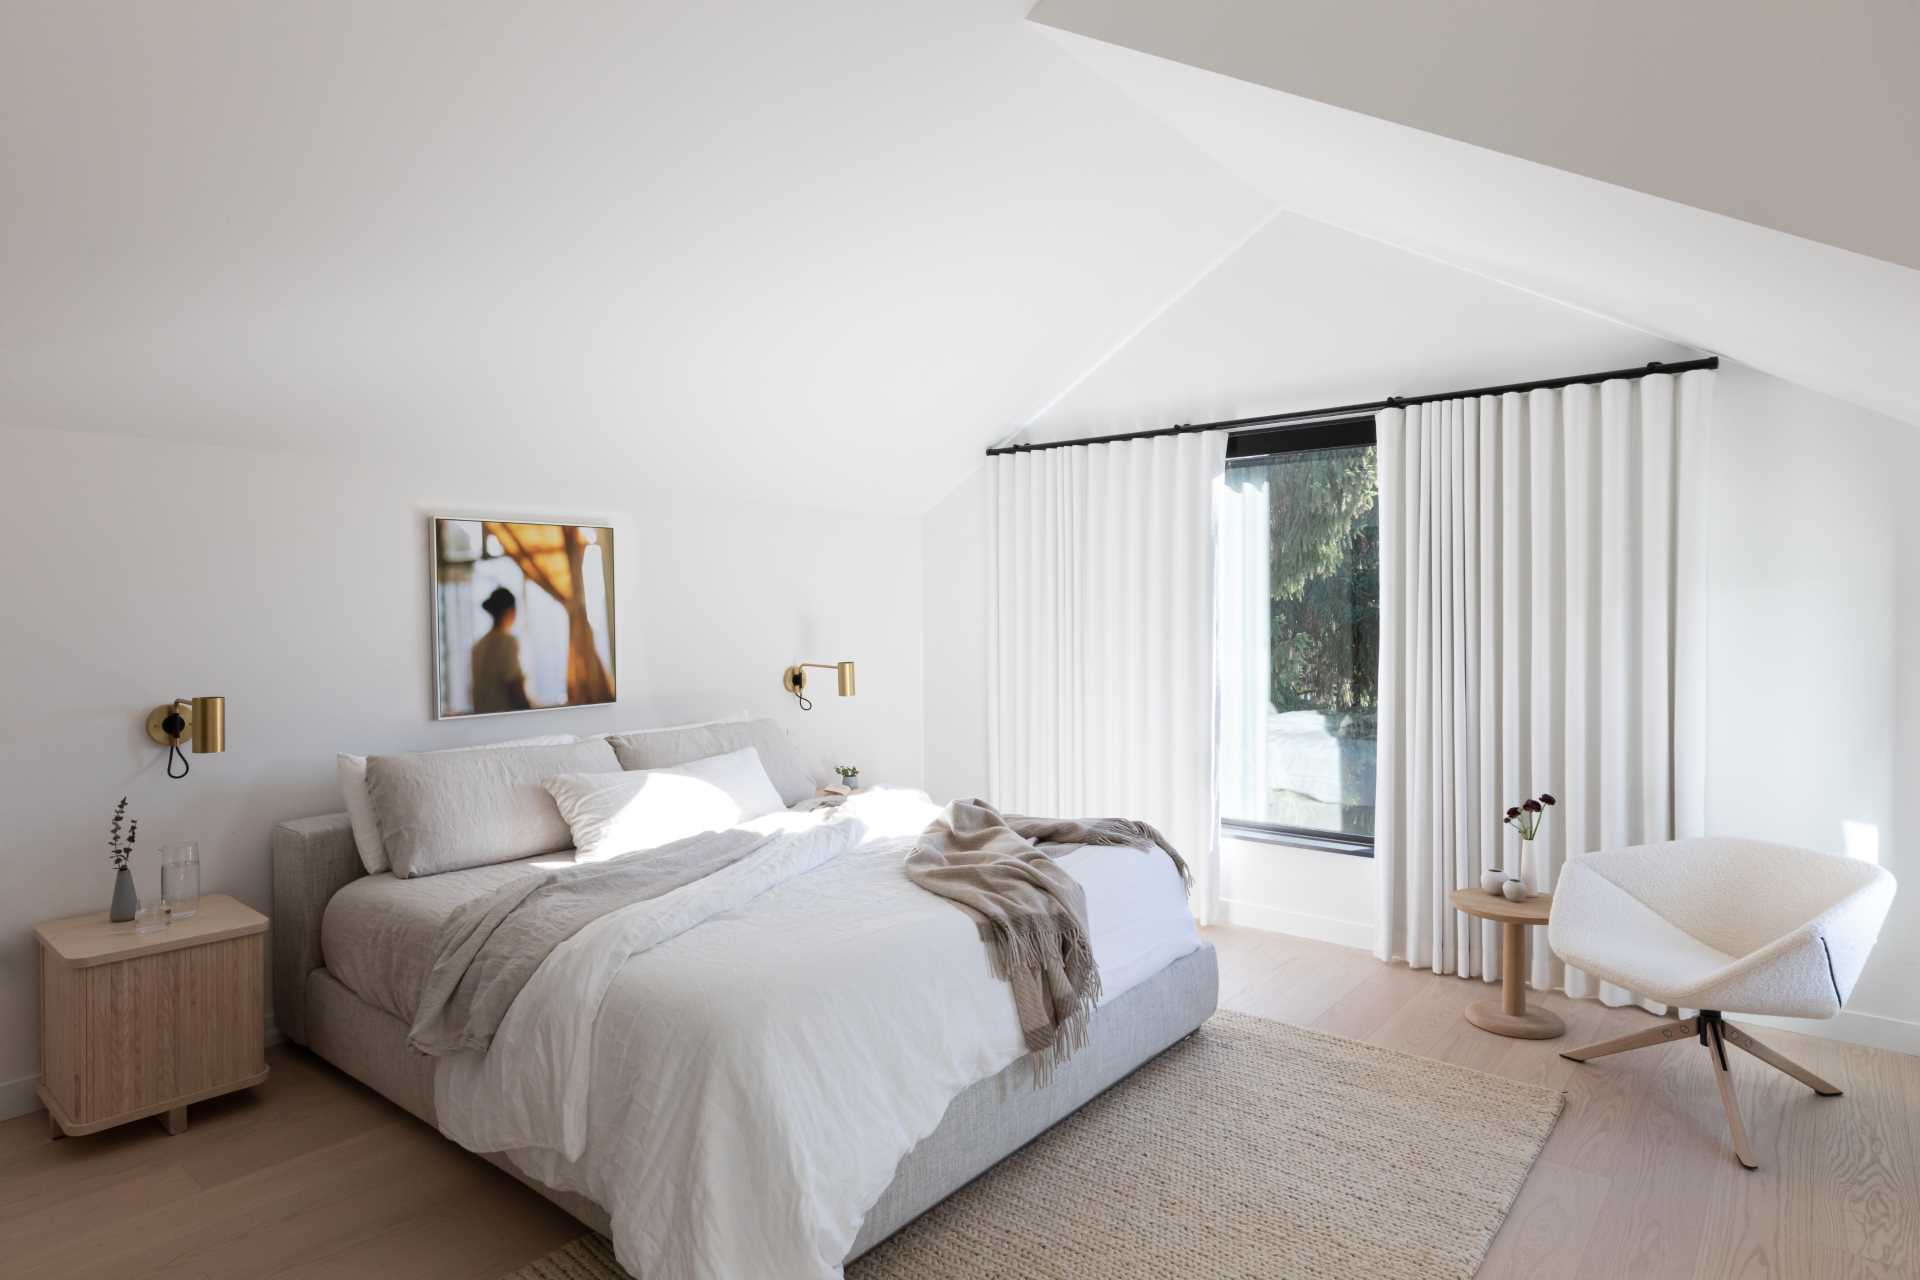 In this modern primary bedroom, a vaulted ceiling and white walls create a large yet calming space.